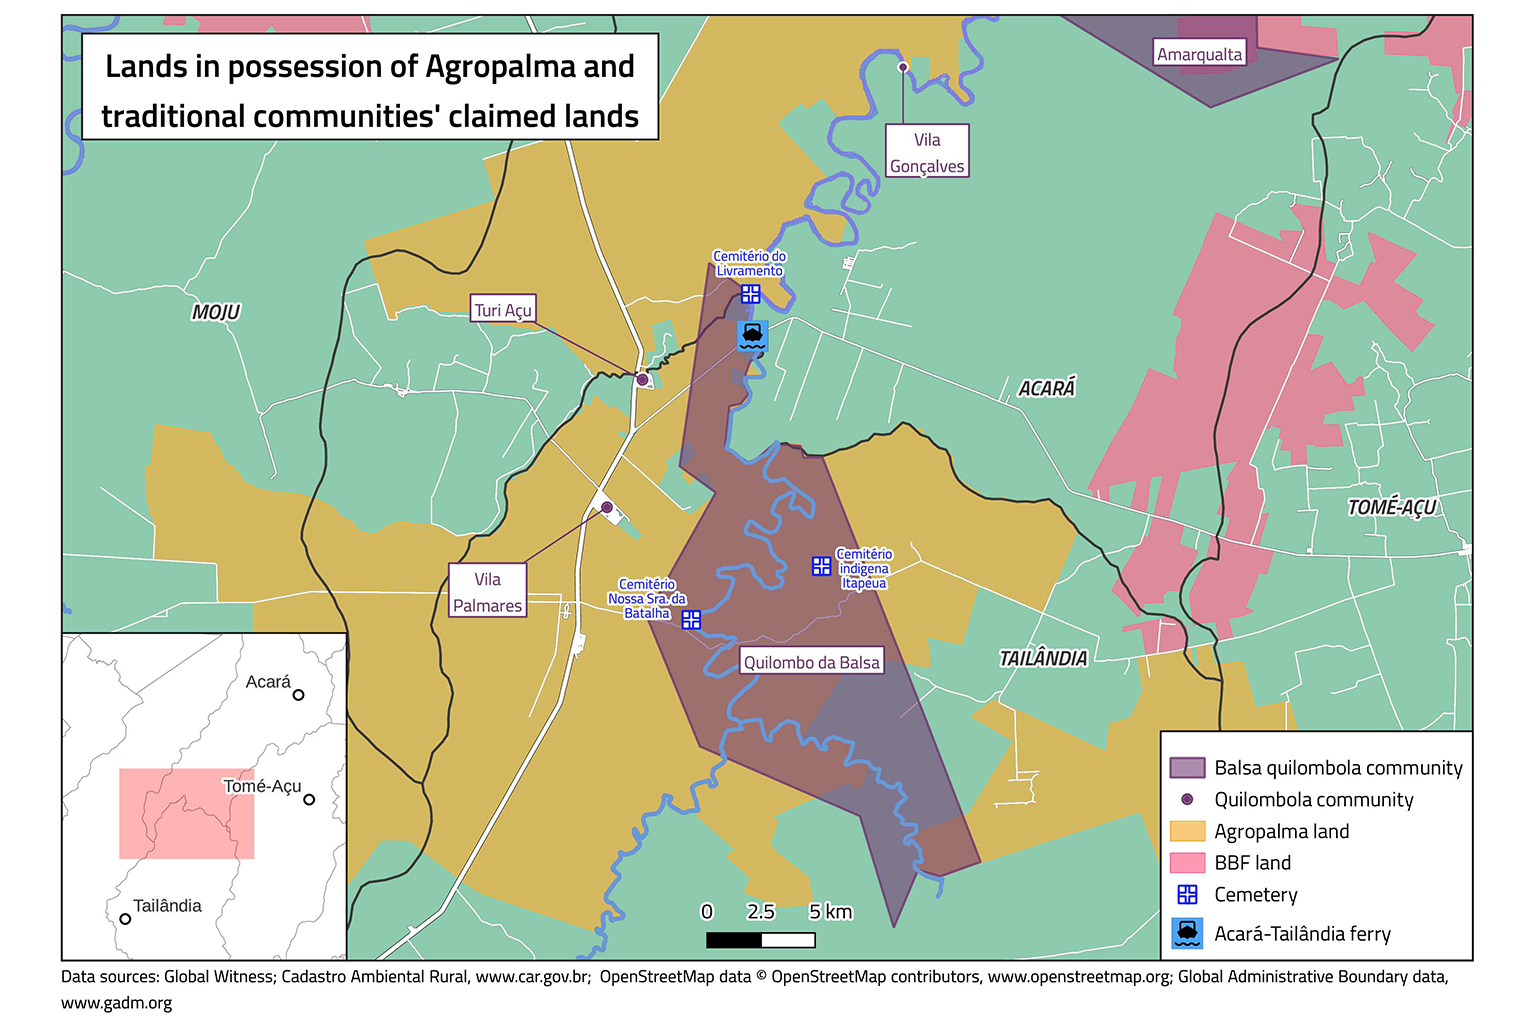 This map shows the lands in possession of Agropalma and traditional communities' claimed lands. 